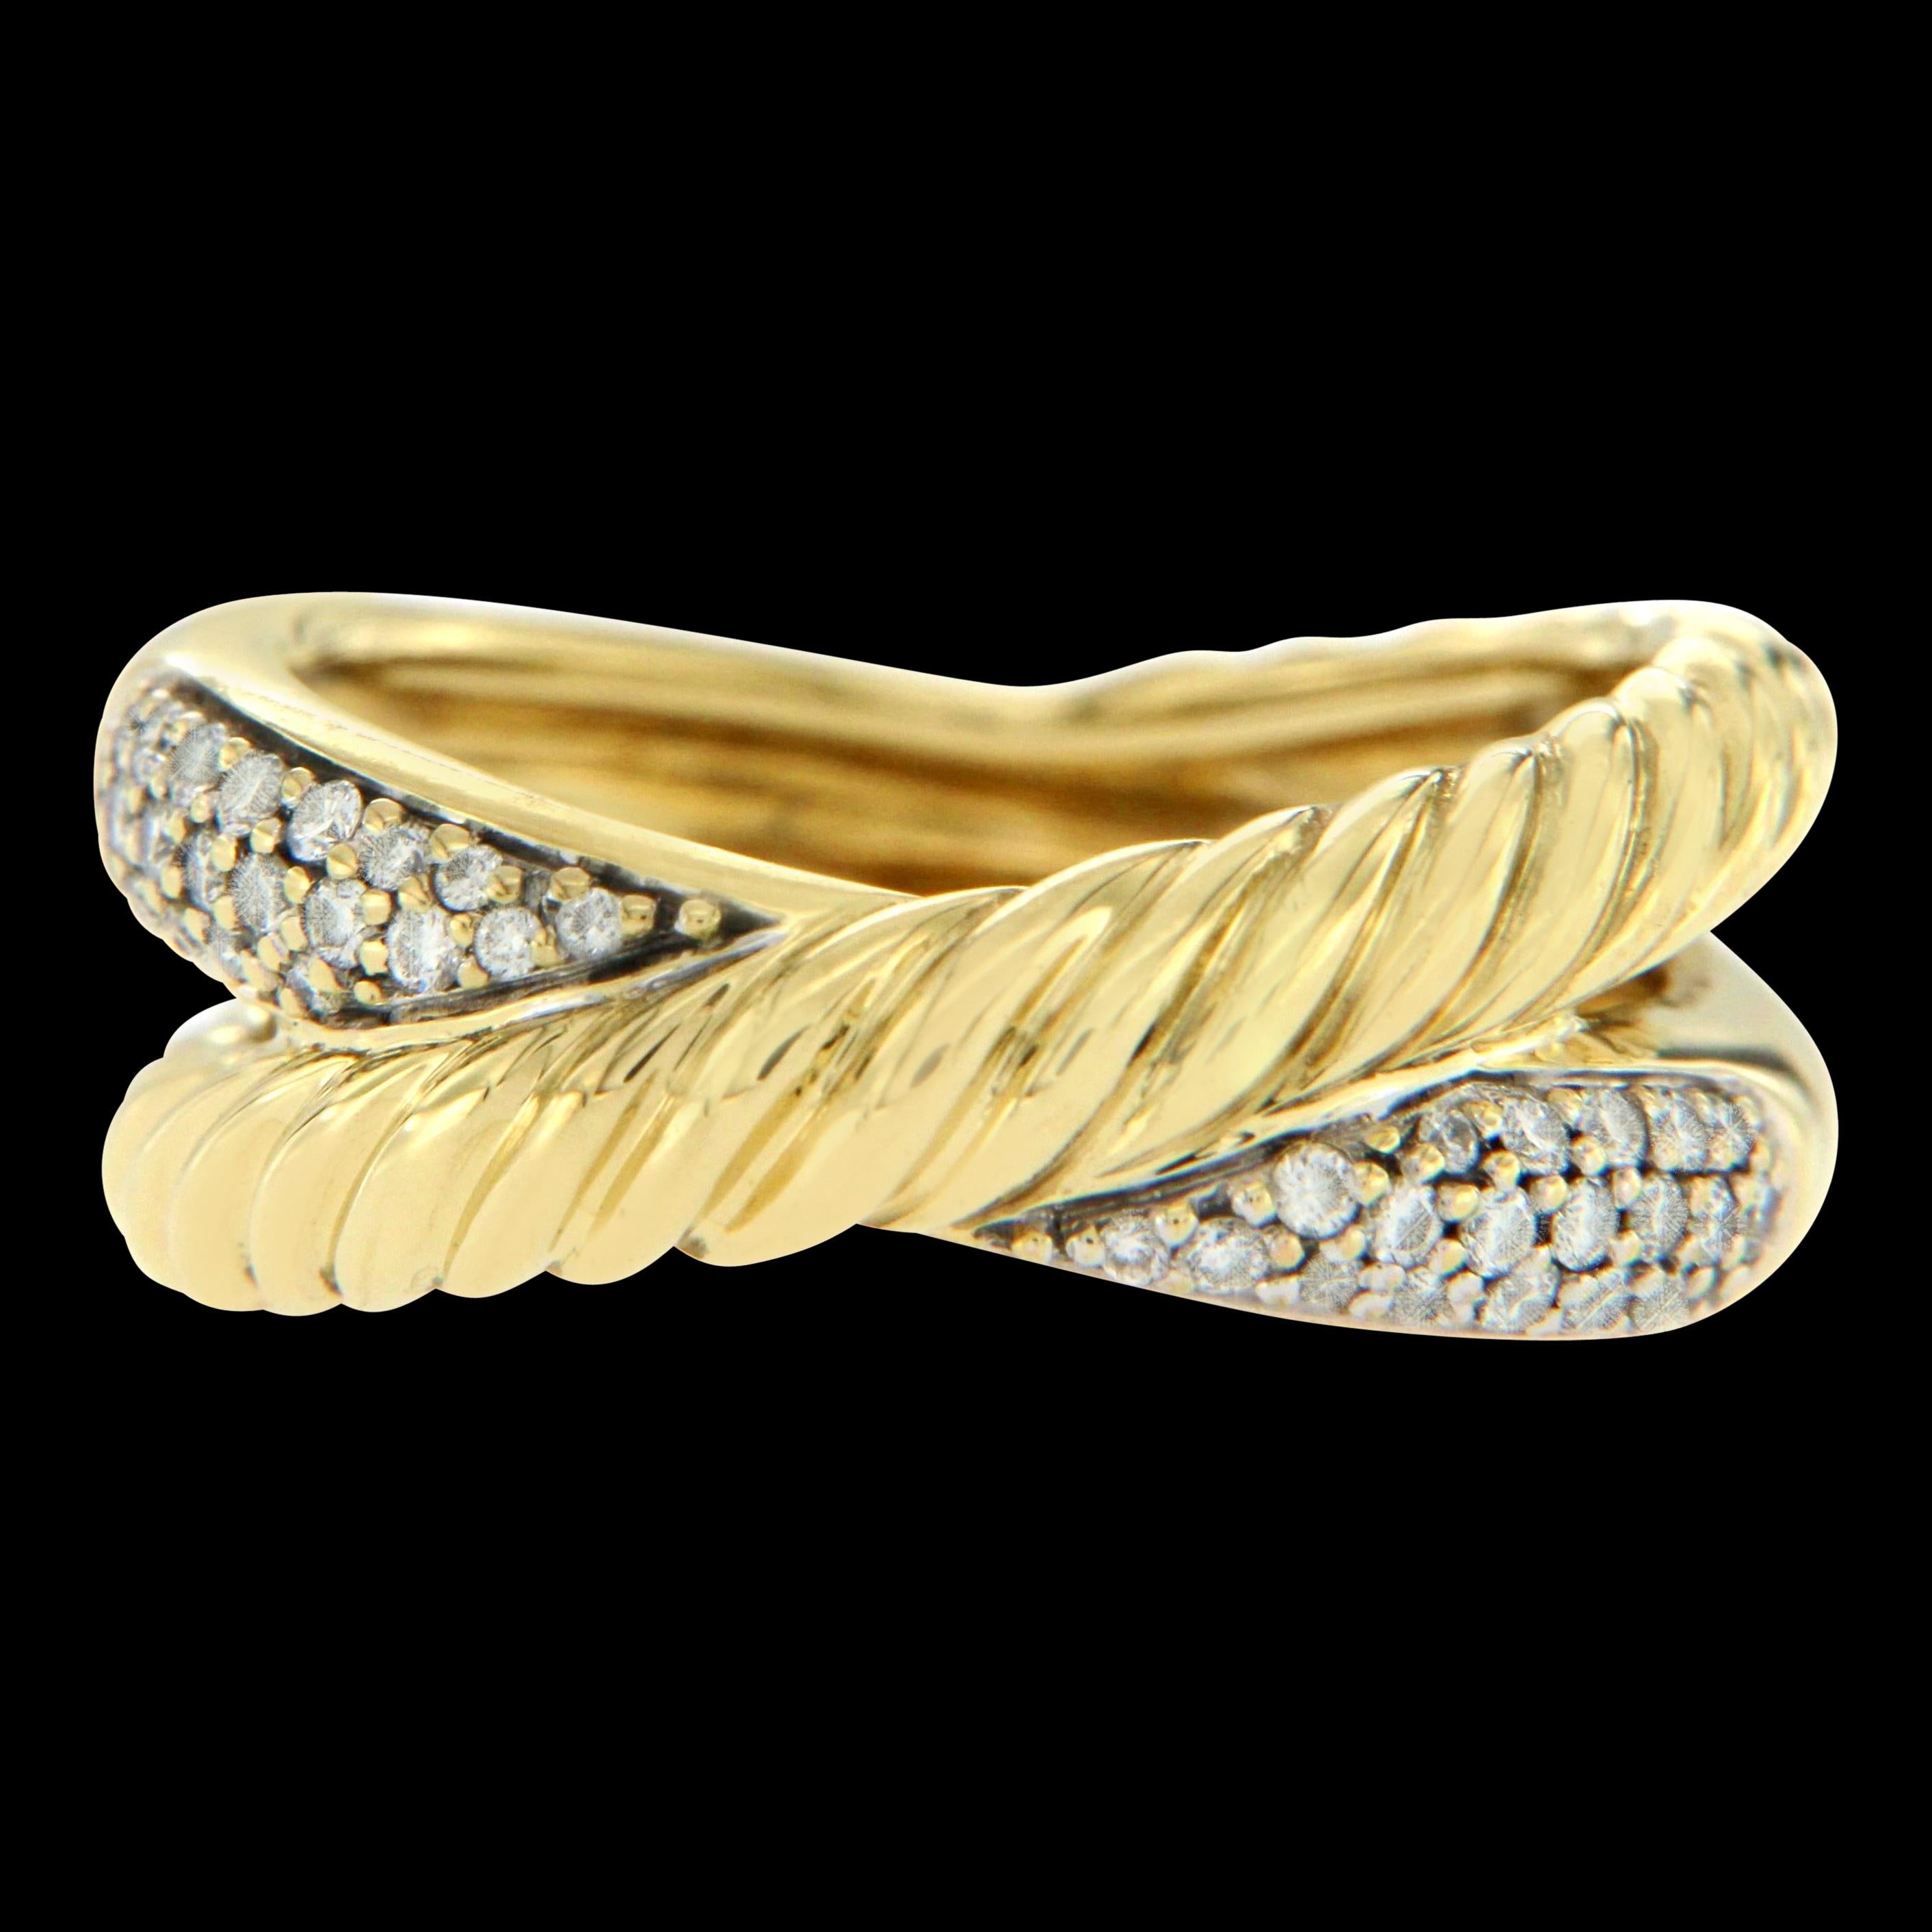 Type: Ring
Top: 7.6 mm
Band Width: 4.2 mm
Metal: Yellow Gold
Metal Purity: 18K
Size:7
Hallmarks: DY 750
Total Weight: 6.7 Grams
Stone Type: Diamonds
Condition: Per-Owned
Stock Number: U11
Retail Price: APX $2995